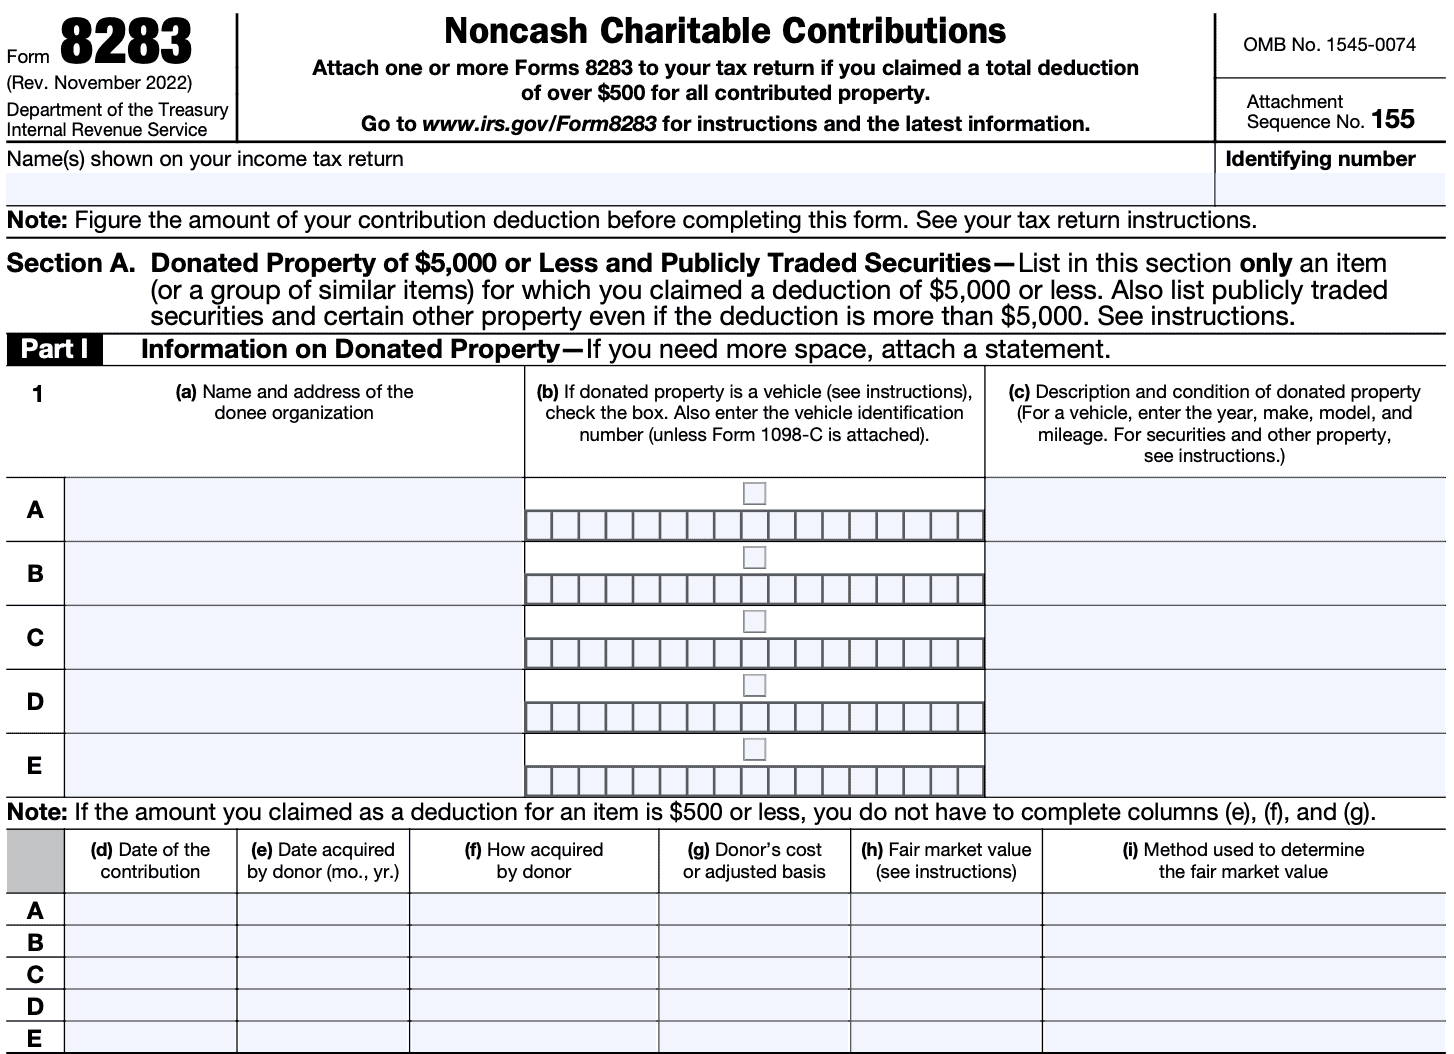 irs form 8283, noncash charitable contributions, Section A